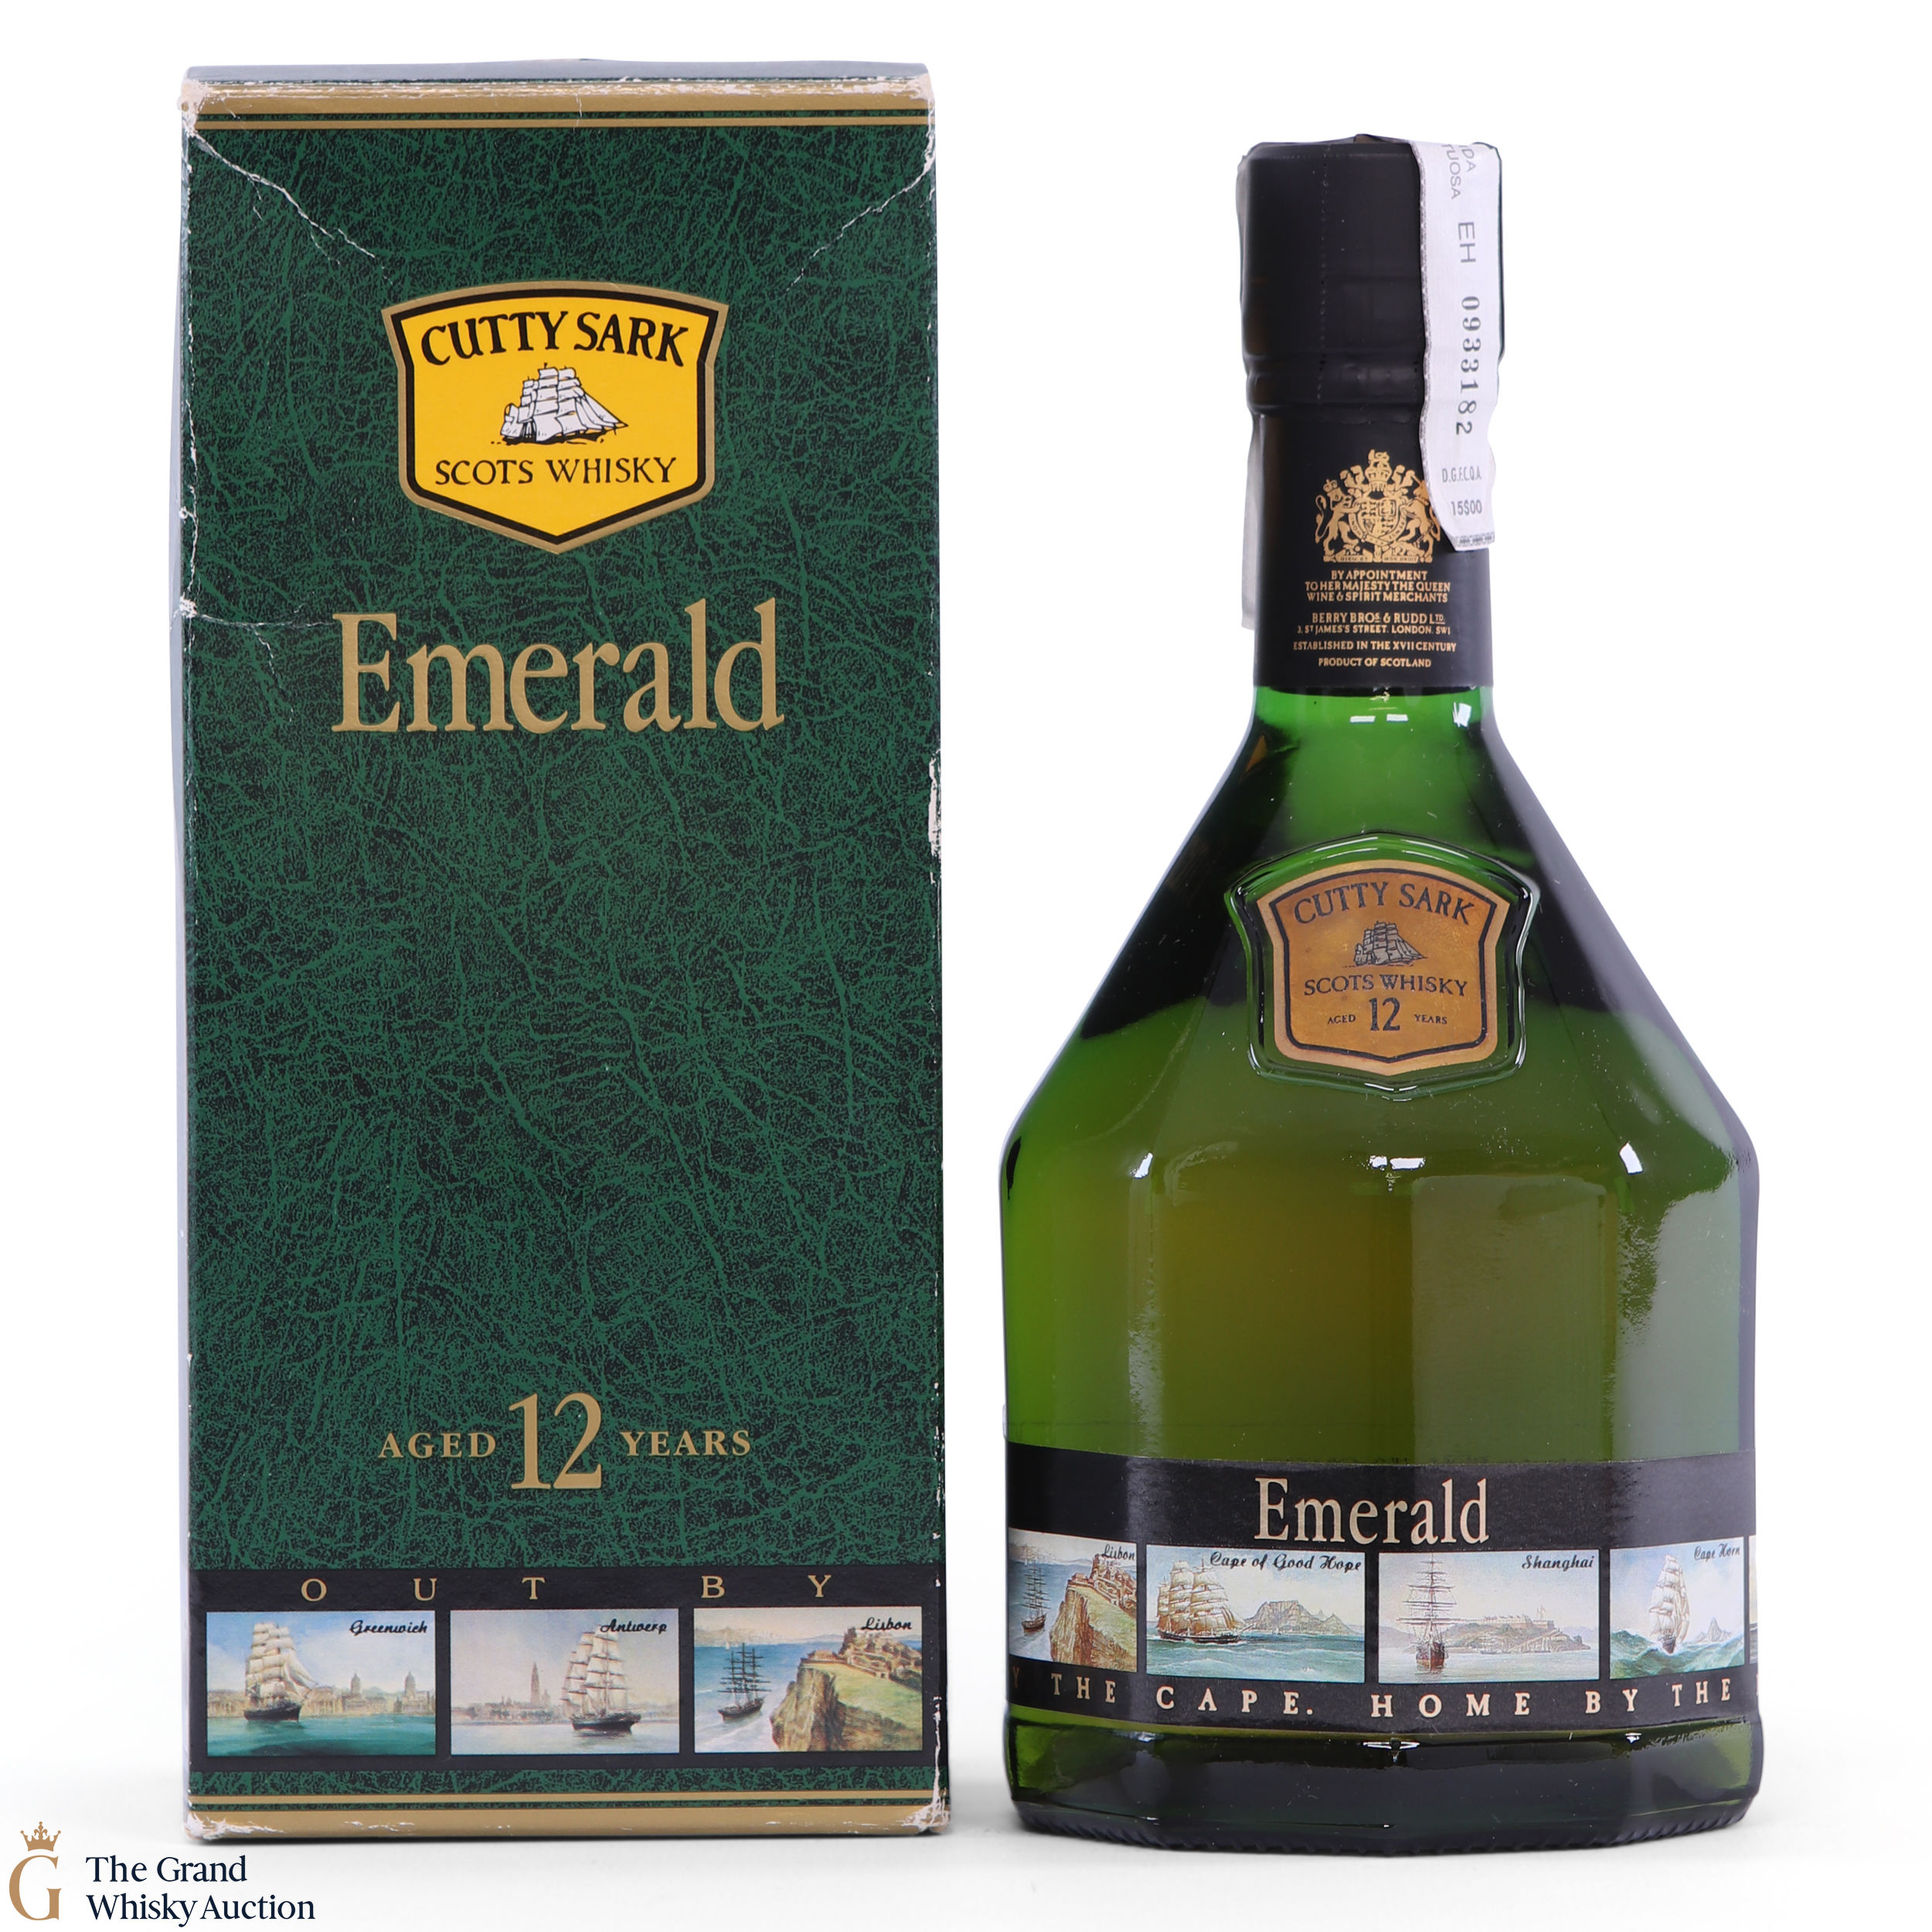 Cutty Sark 12 Year Old Emerald Auction The Grand Whisky Auction